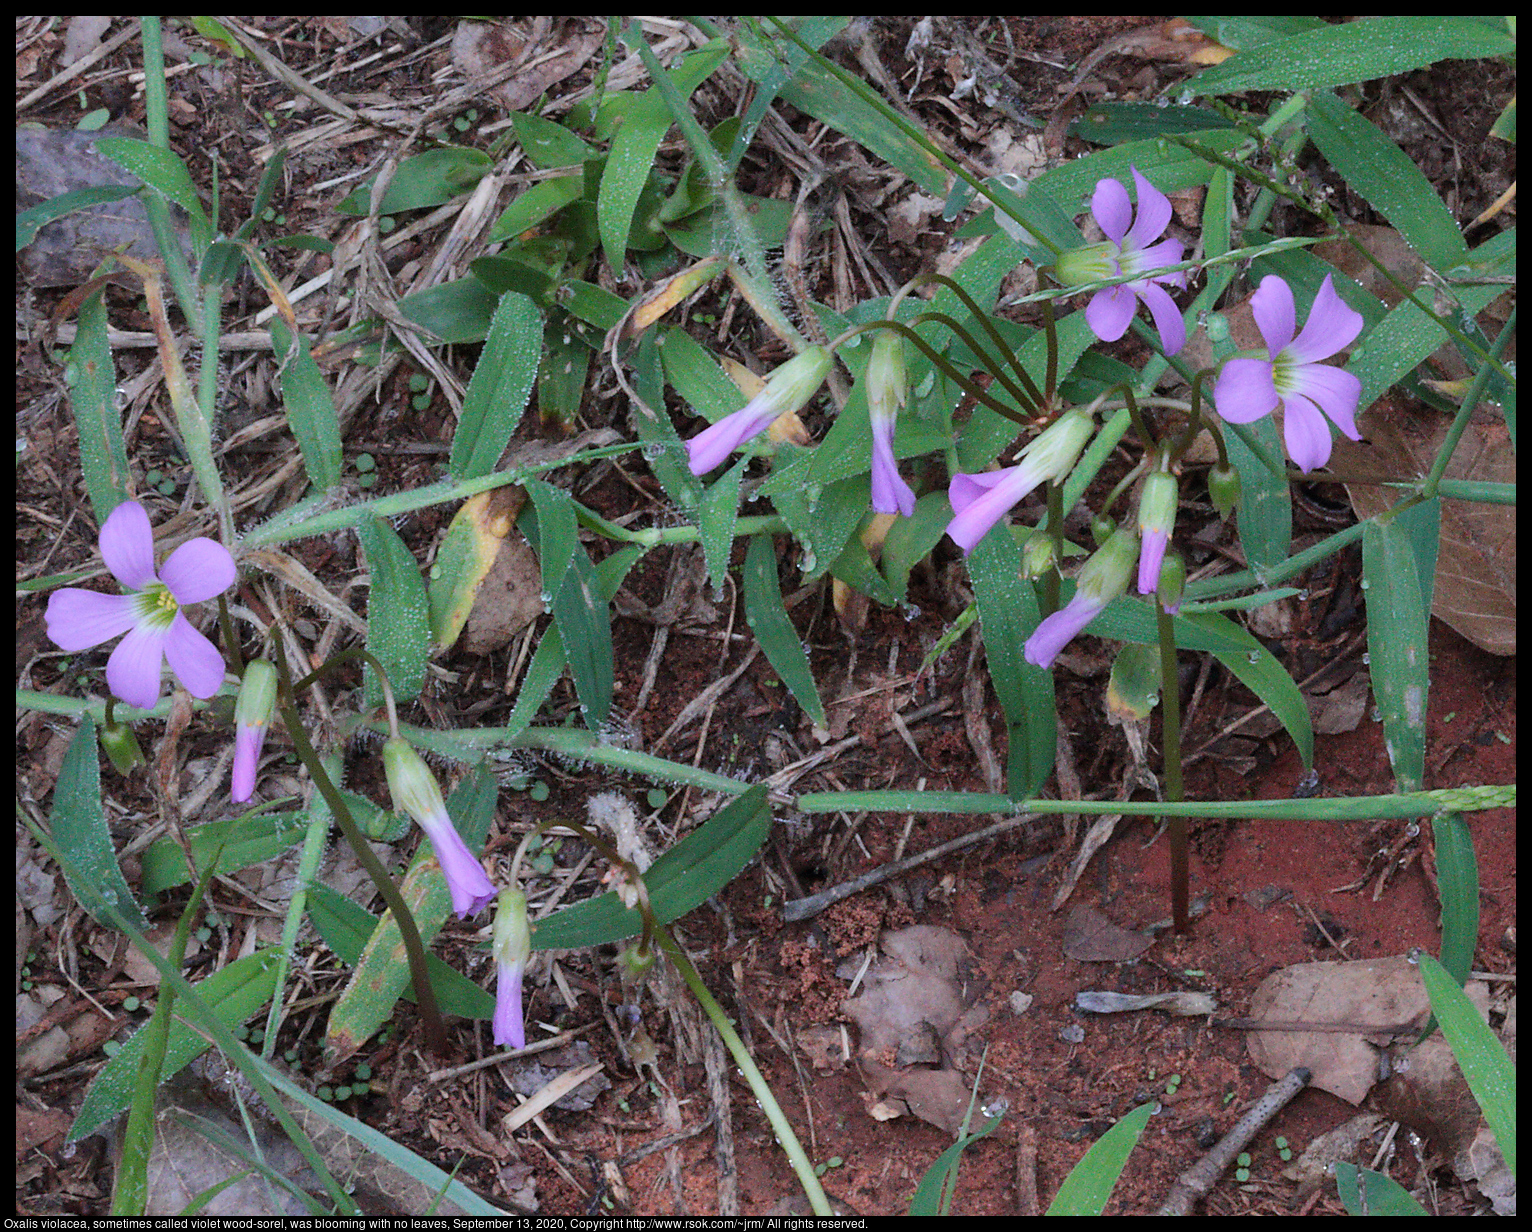 Oxalis violacea, sometimes called violet wood-sorel, was blooming with no leaves, September 13, 2020